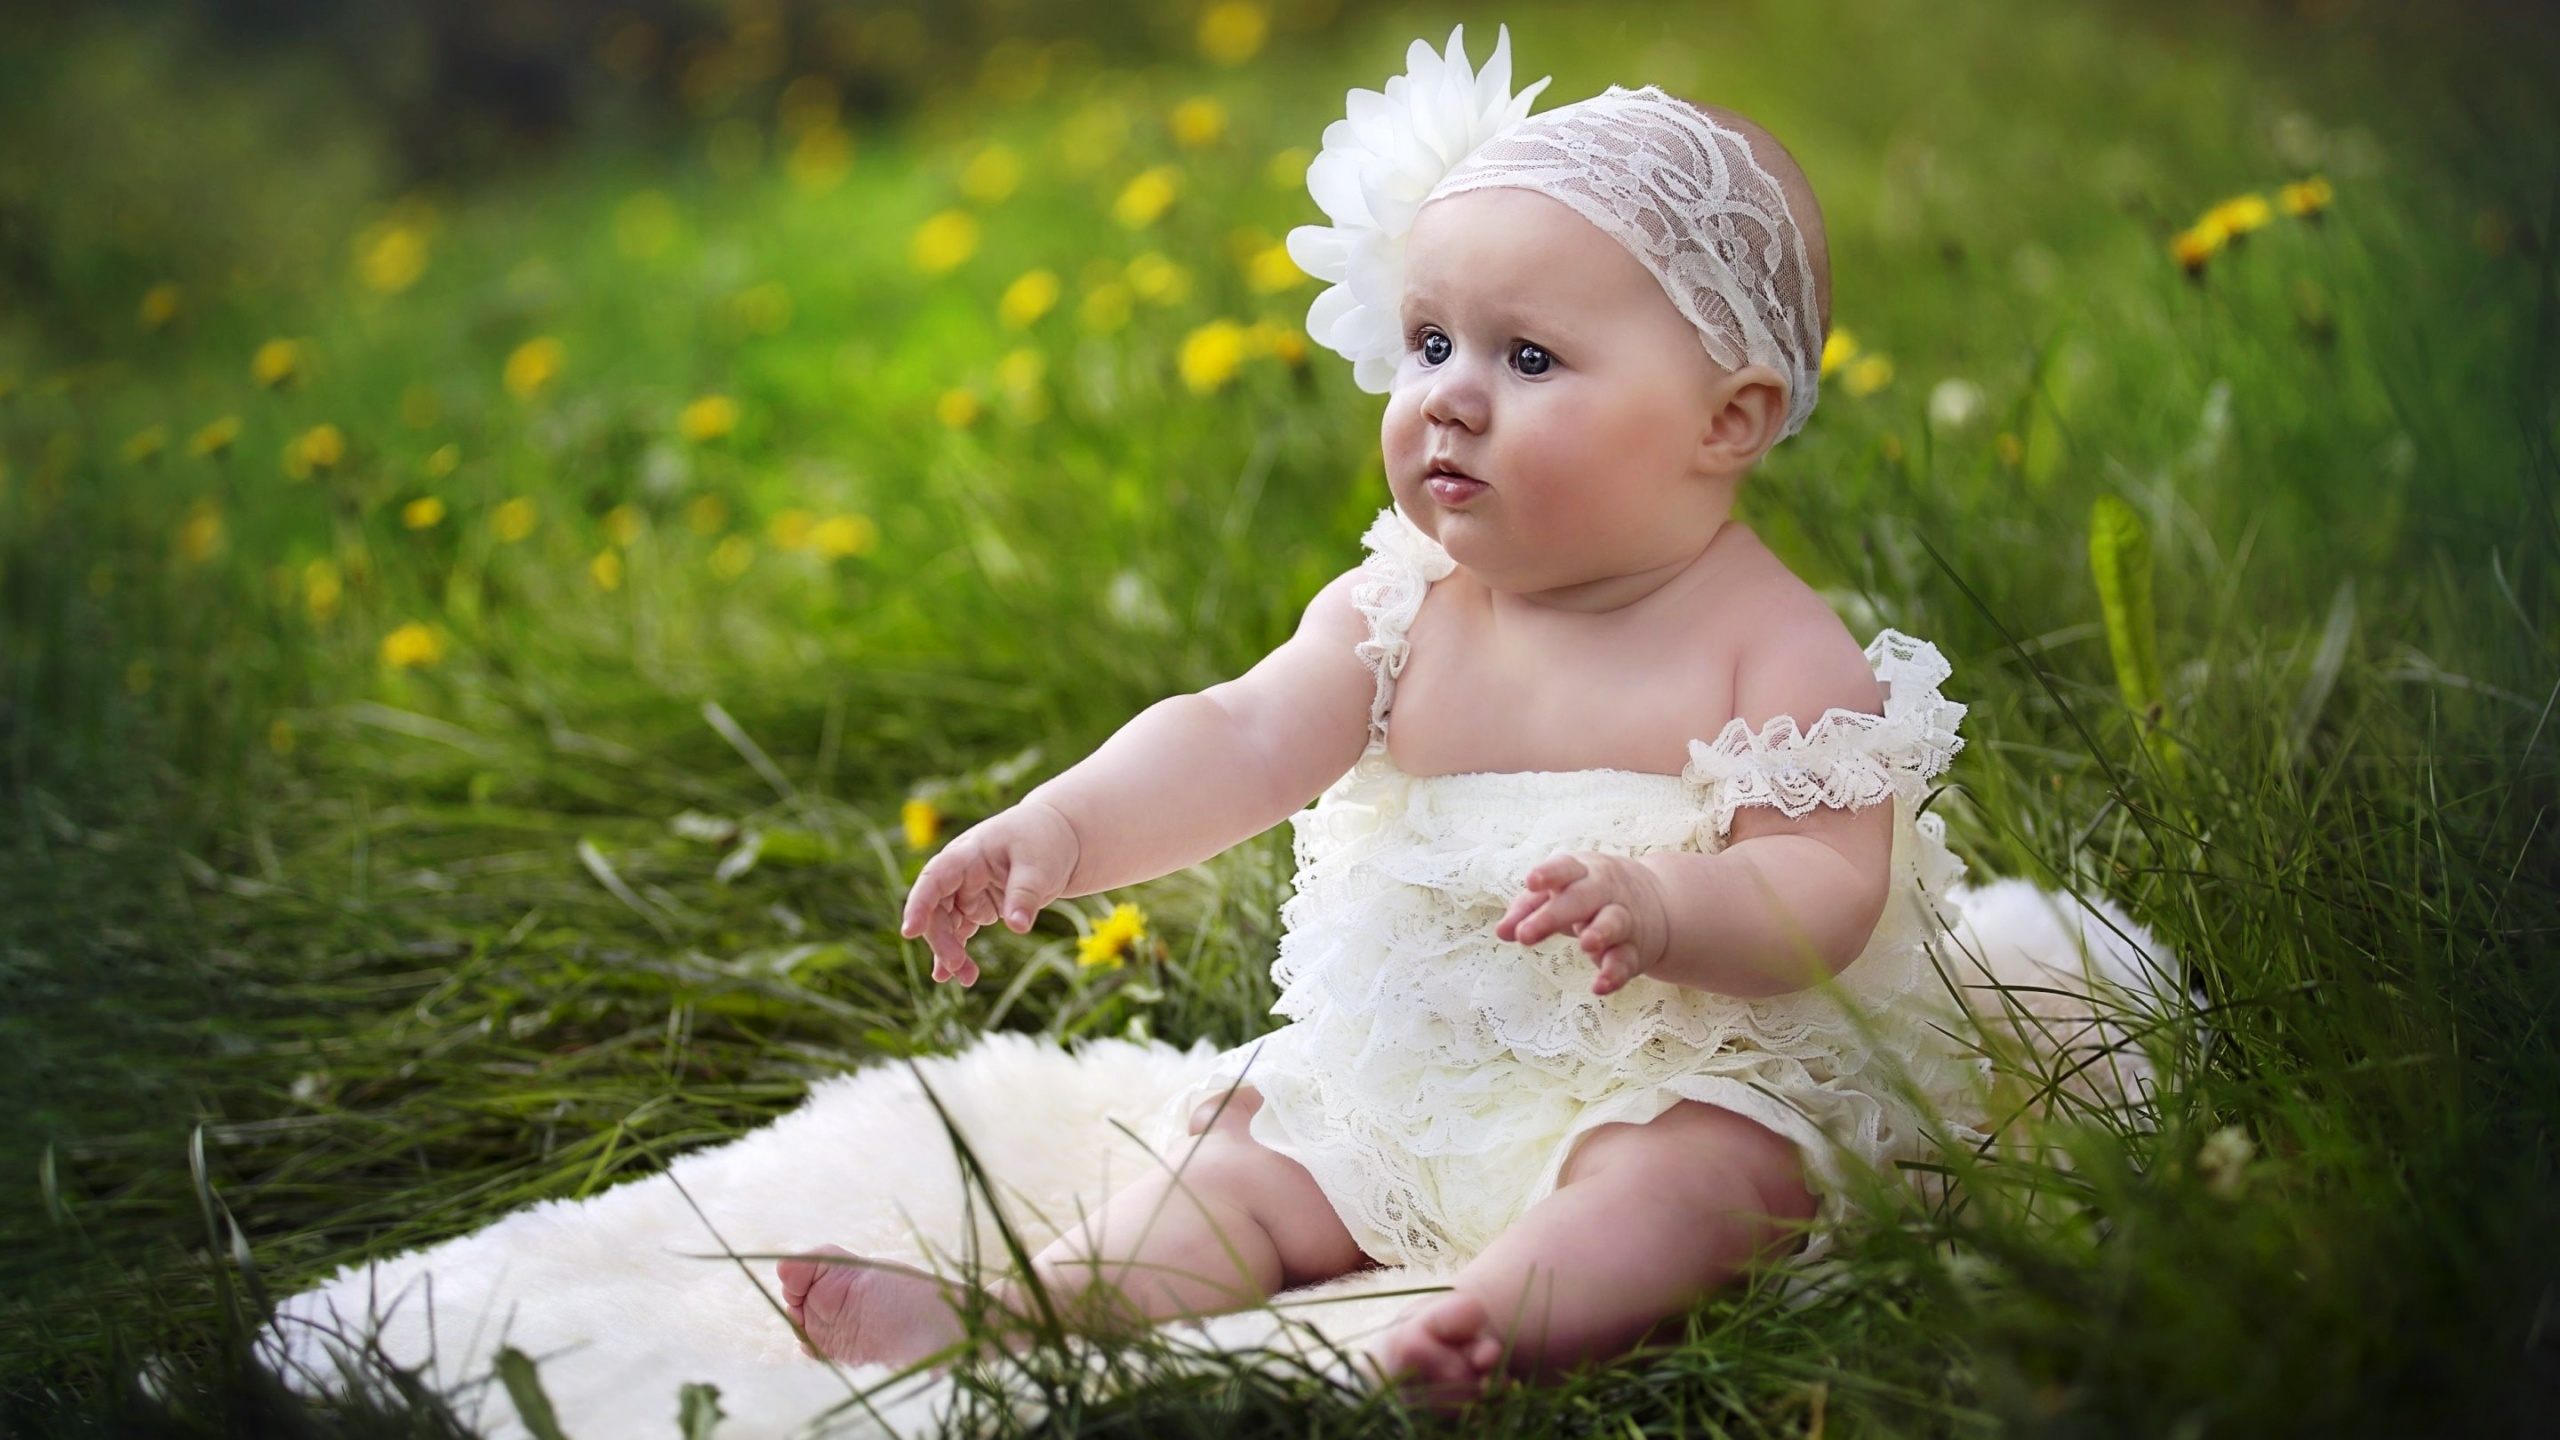 cute baby girl wallpaper,child,people in nature,photograph,grass,skin